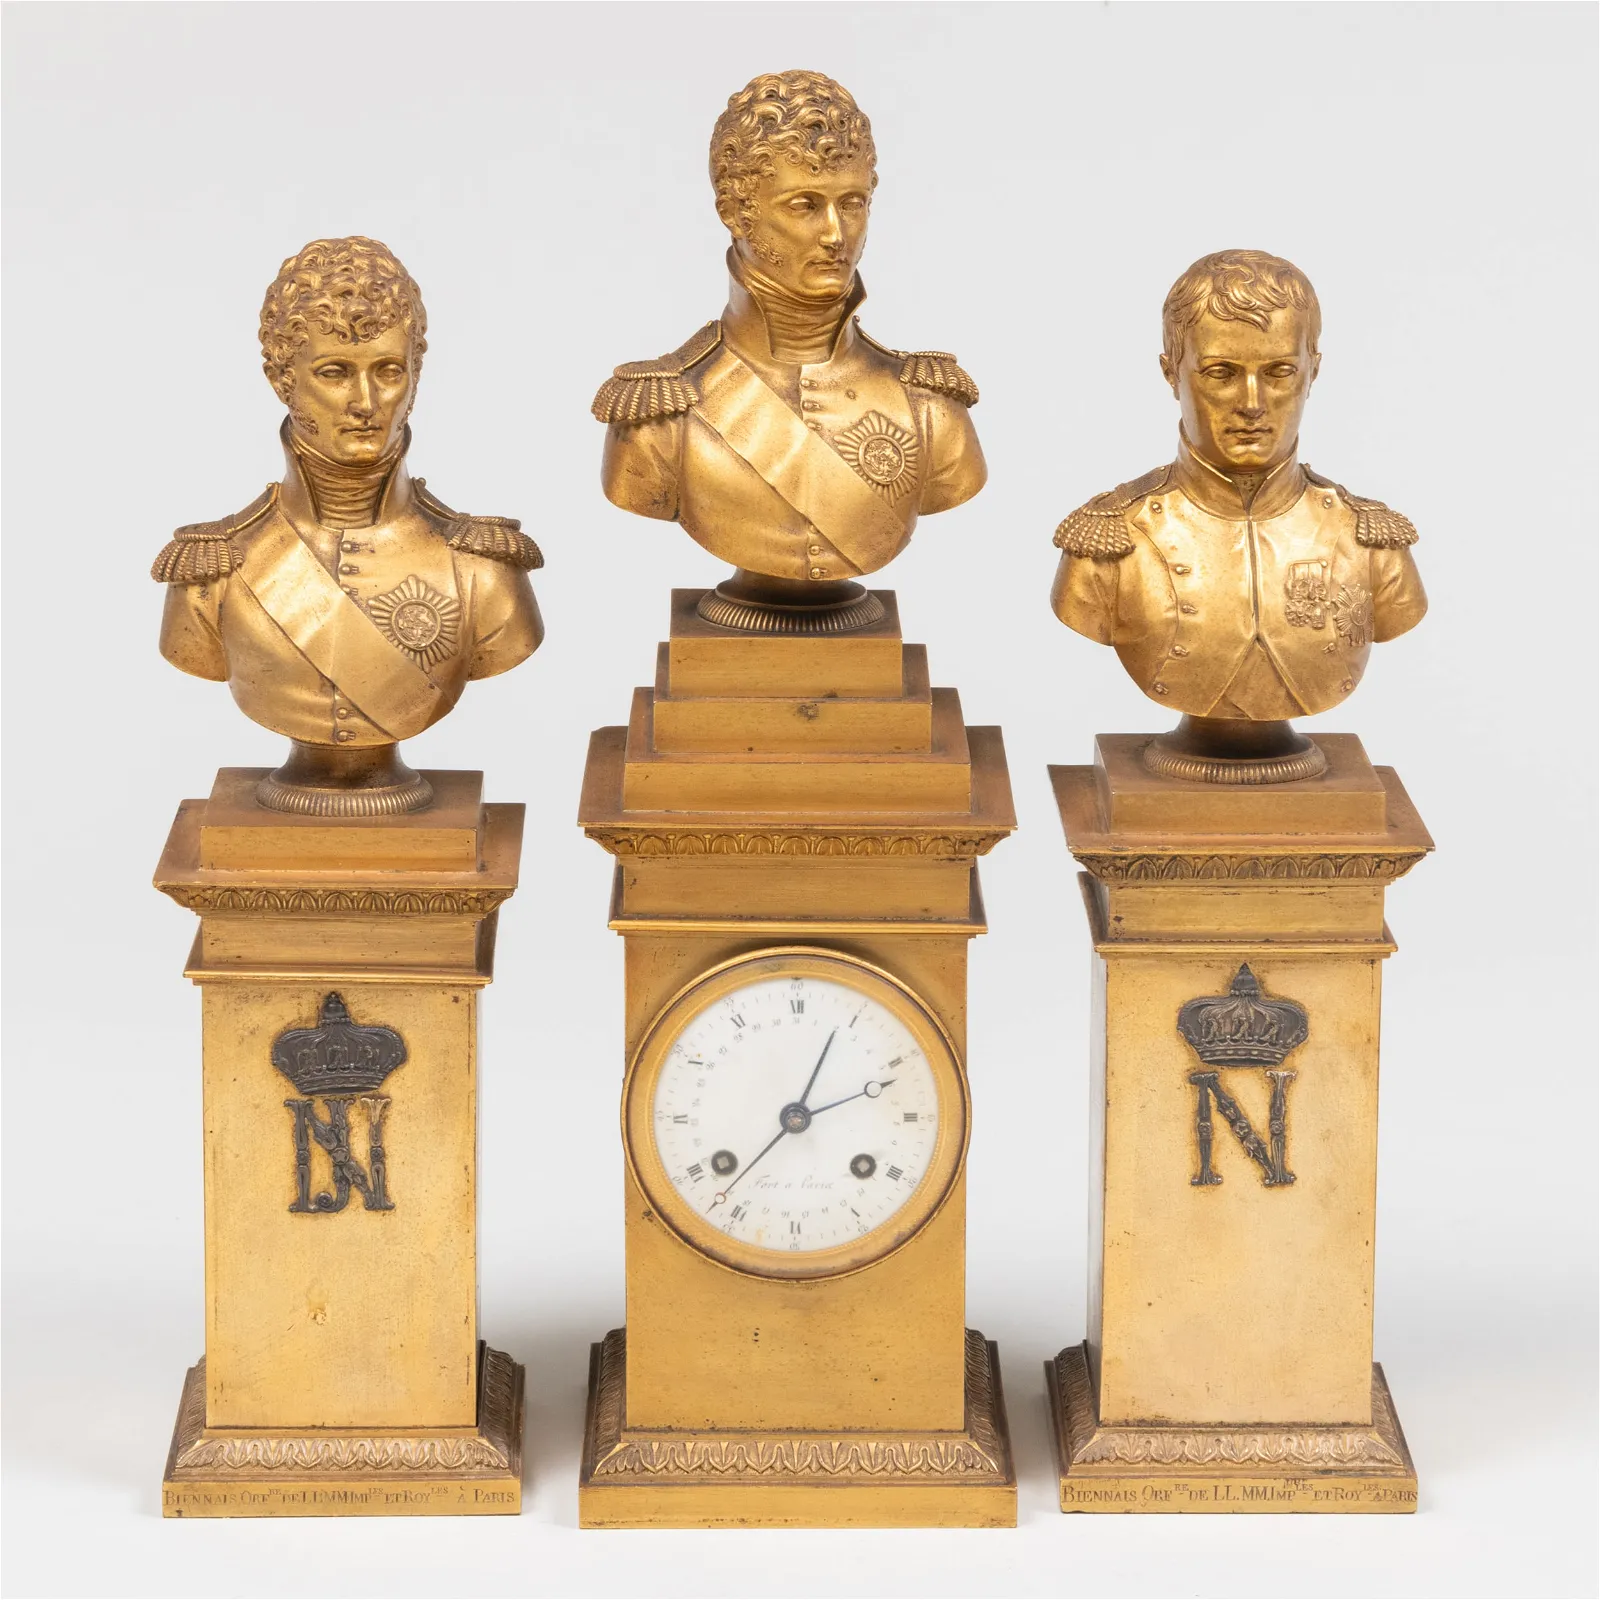 A trio of French Empire gilt bronzes from the Napoleonides series by Martin-Guillaume Biennais sold for $40,000 at Stair Galleries.